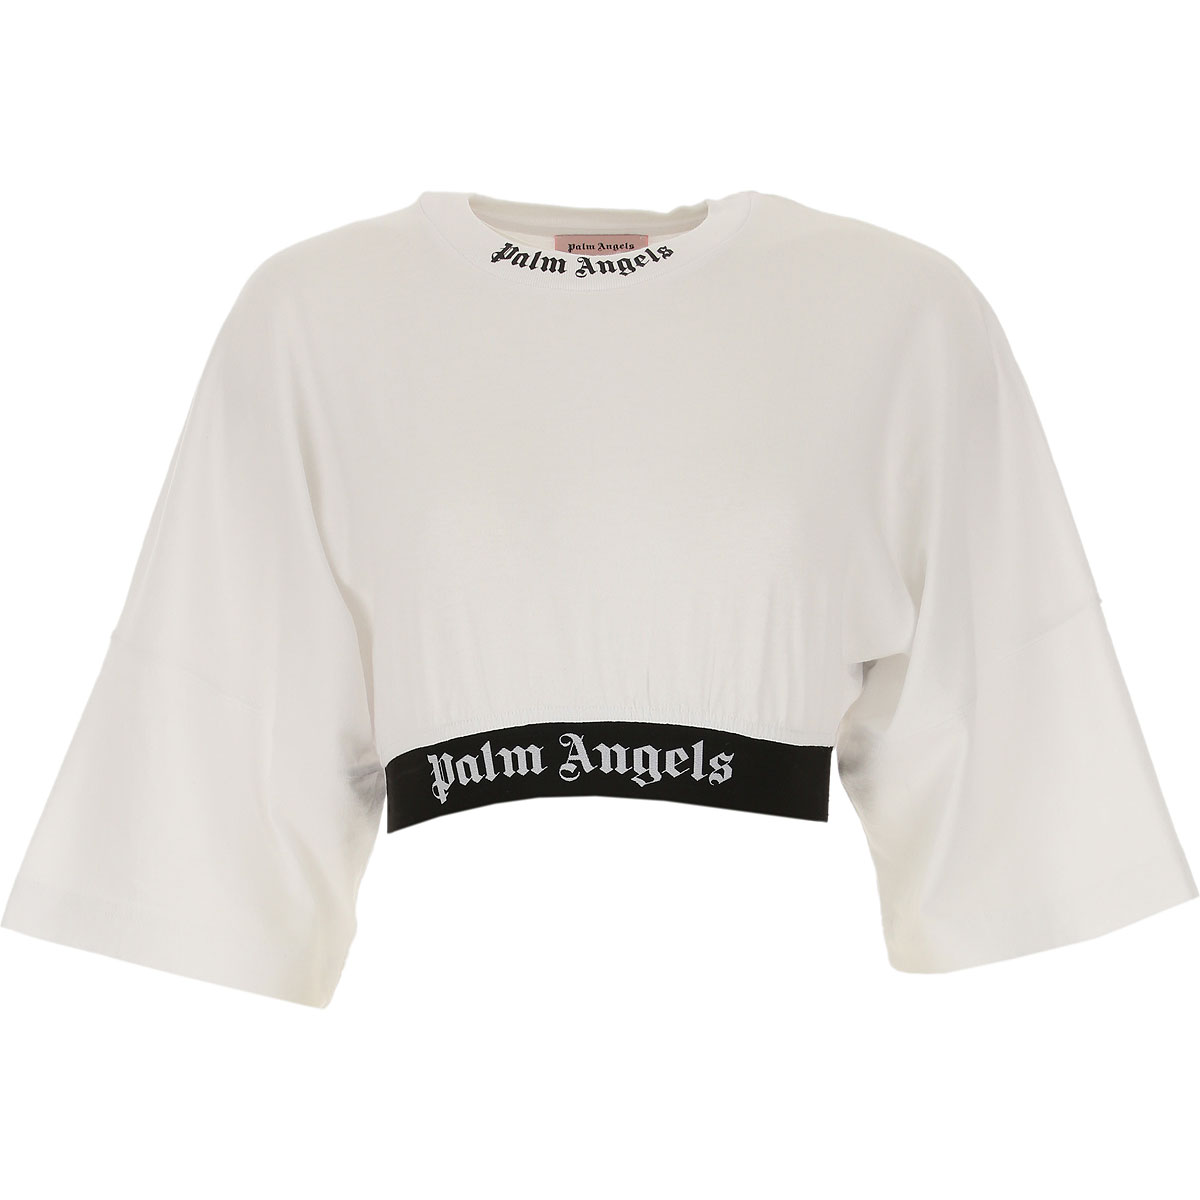 Womens Clothing Palm Angels, Style code: pwaa002r194130030110--